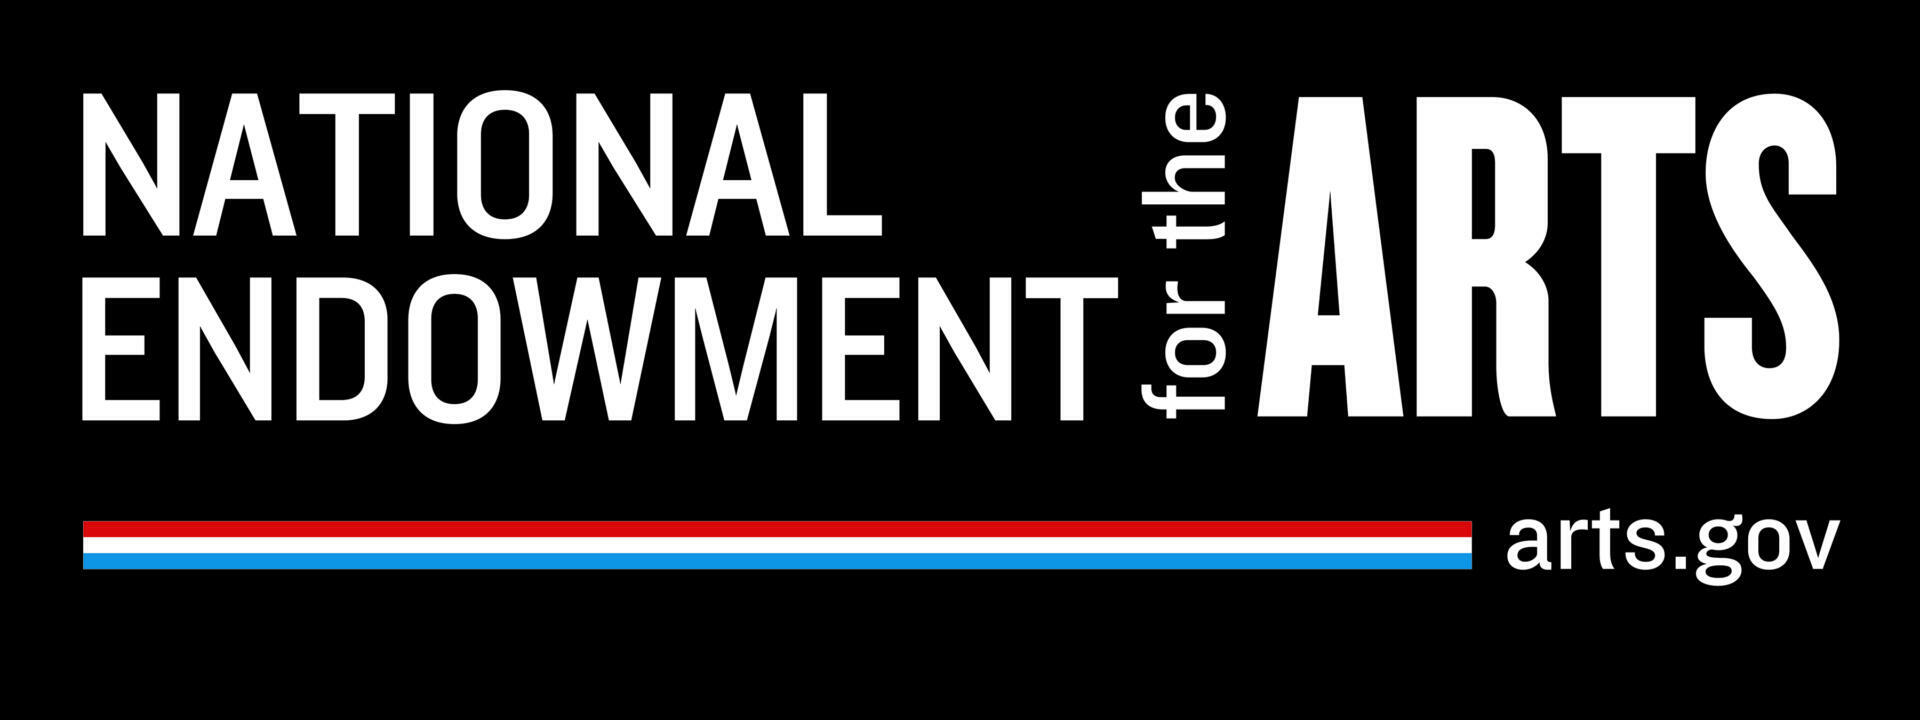 The National Endowment for the Arts Announces 135 Million in Relief Funds